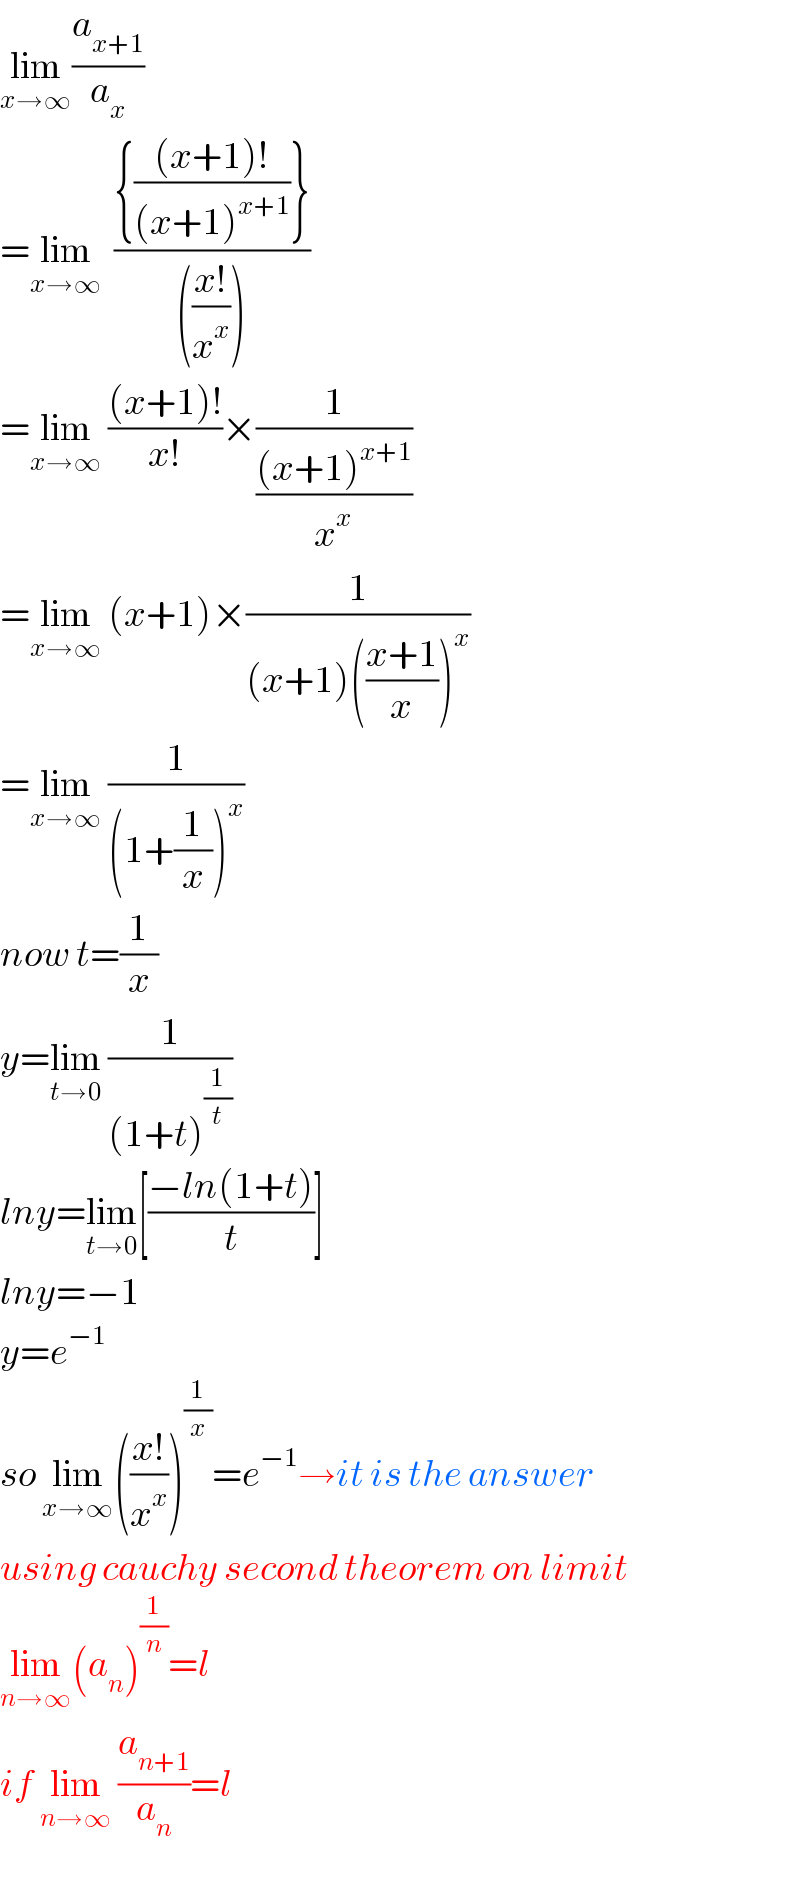 lim_(x→∞) (a_(x+1) /a_x )  =lim_(x→∞)   (({(((x+1)!)/((x+1)^(x+1) ))})/((((x!)/x^x ))))  =lim_(x→∞)  (((x+1)!)/(x!))×(1/(((x+1)^(x+1) )/x^x ))  =lim_(x→∞)  (x+1)×(1/((x+1)(((x+1)/x))^x ))  =lim_(x→∞)  (1/((1+(1/x))^x ))  now t=(1/x)  y=lim_(t→0)  (1/((1+t)^(1/t) ))  lny=lim_(t→0) [((−ln(1+t))/t)]  lny=−1  y=e^(−1)   so lim_(x→∞) (((x!)/x^x ))^(1/x) =e^(−1) →it is the answer  using cauchy second theorem on limit  lim_(n→∞) (a_n )^(1/n) =l  if lim_(n→∞)  (a_(n+1) /a_n )=l  